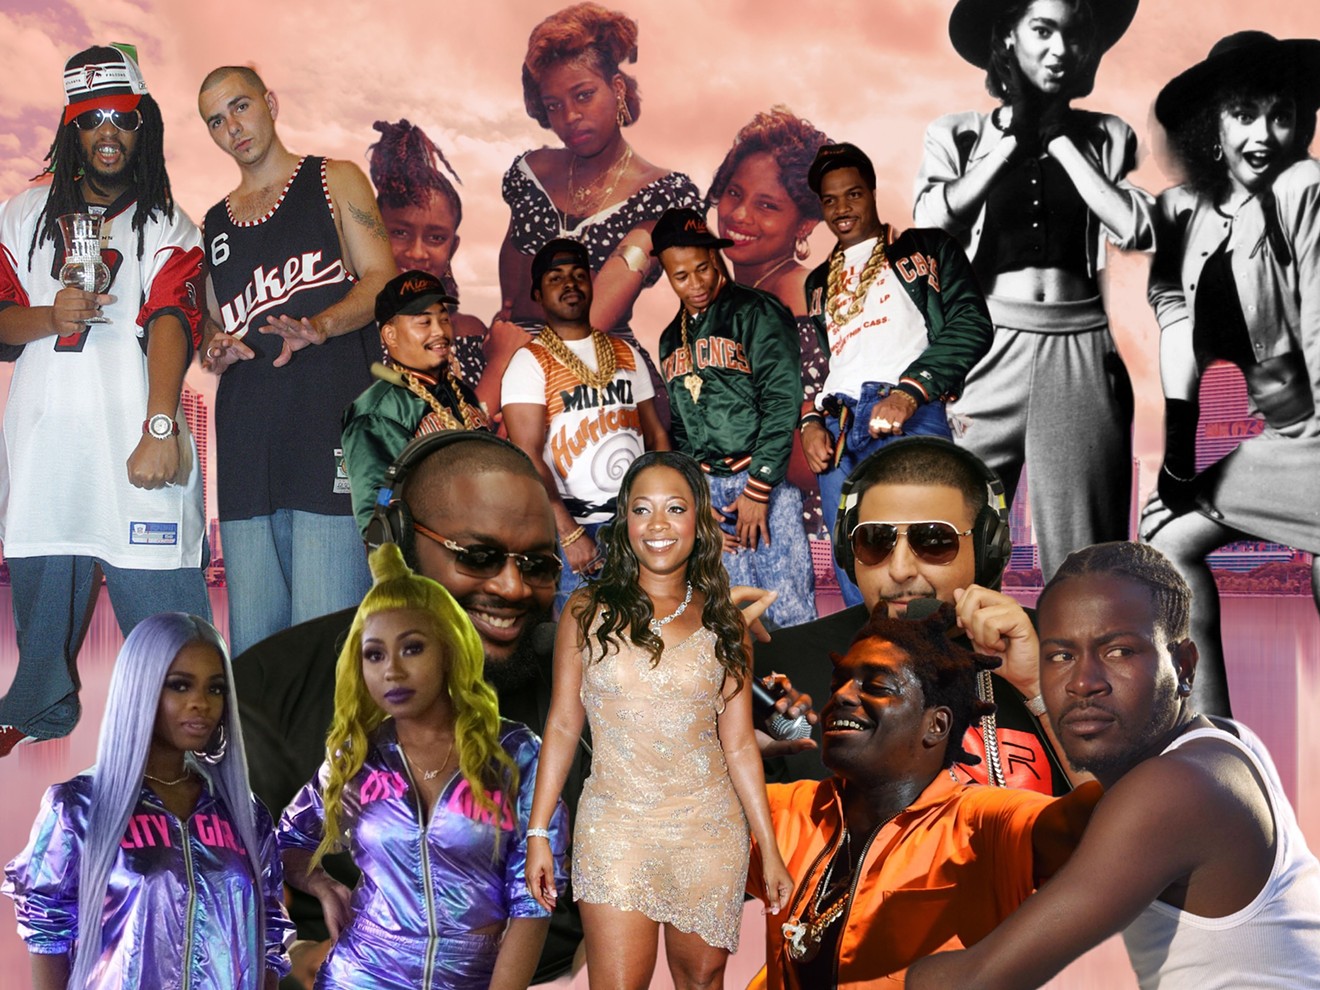 Over the past 50 years, hip-hop music has continuously been shaped by the "Miami sound" and Southern culture.